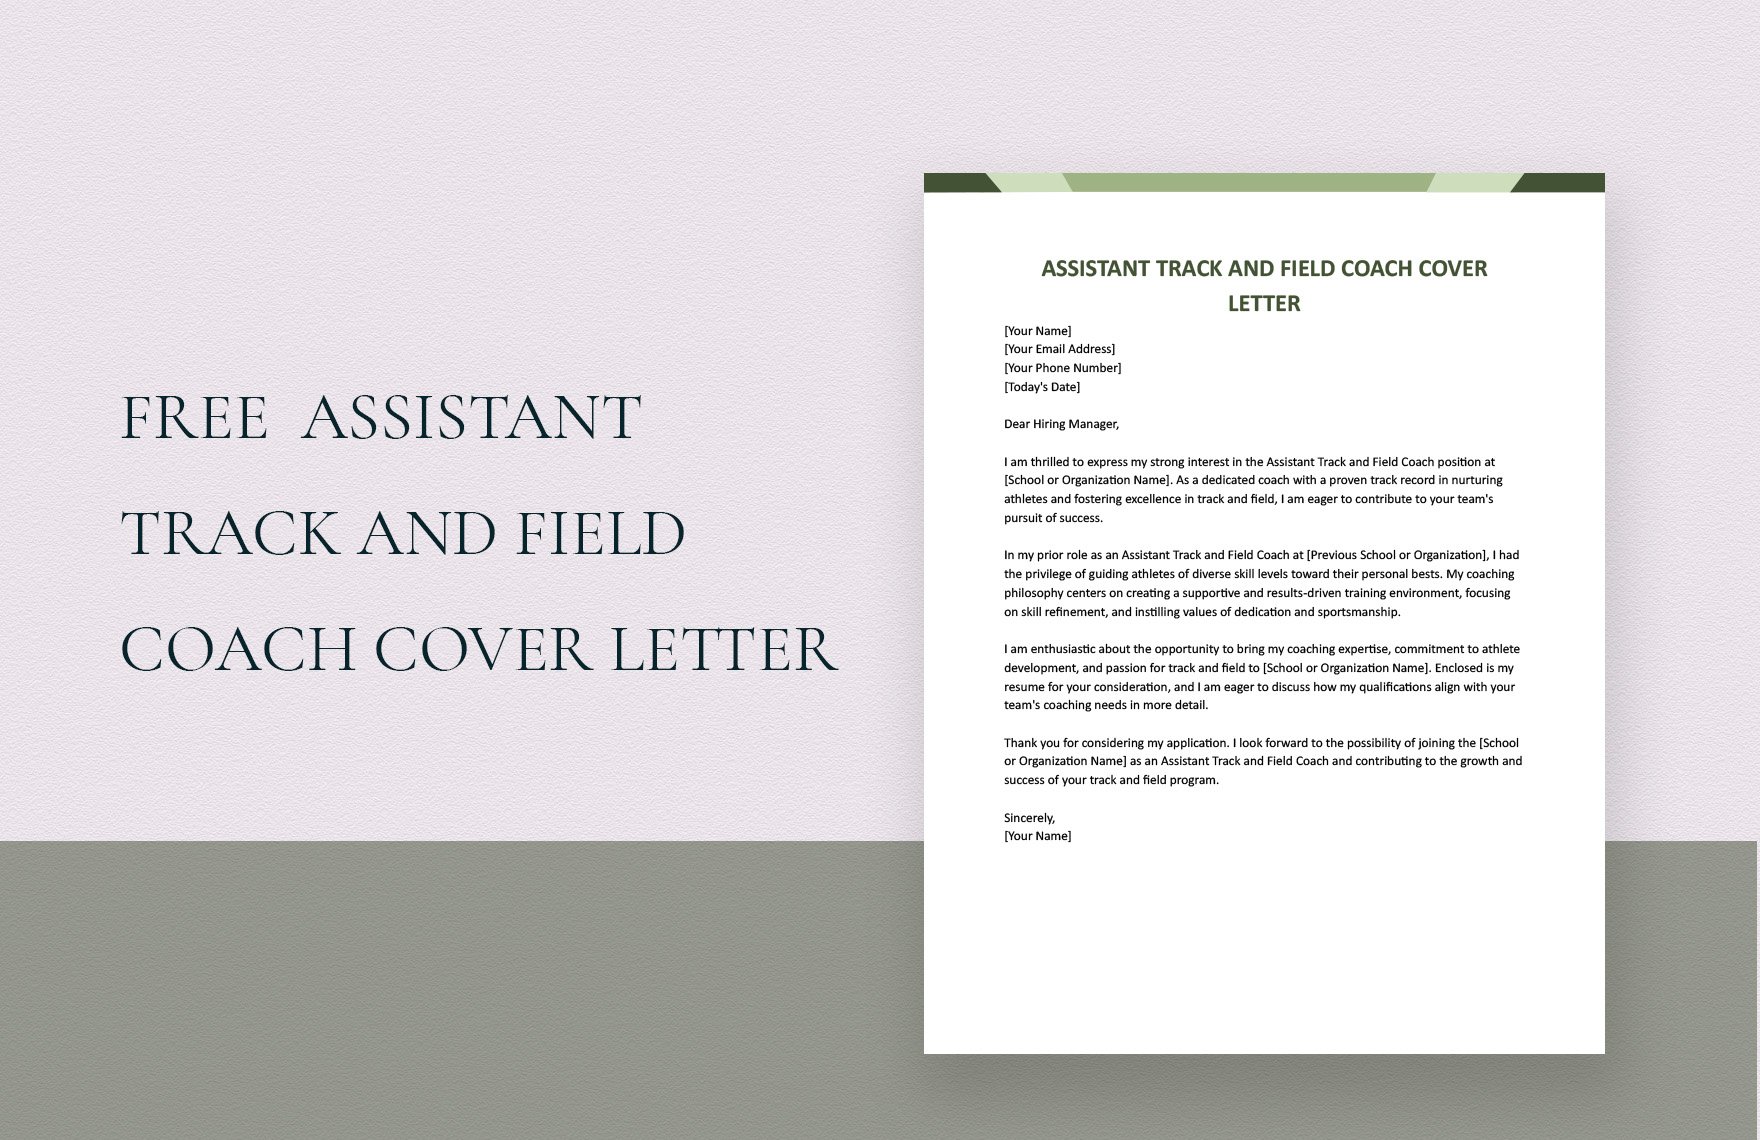 Assistant Track and Field Coach Cover Letter